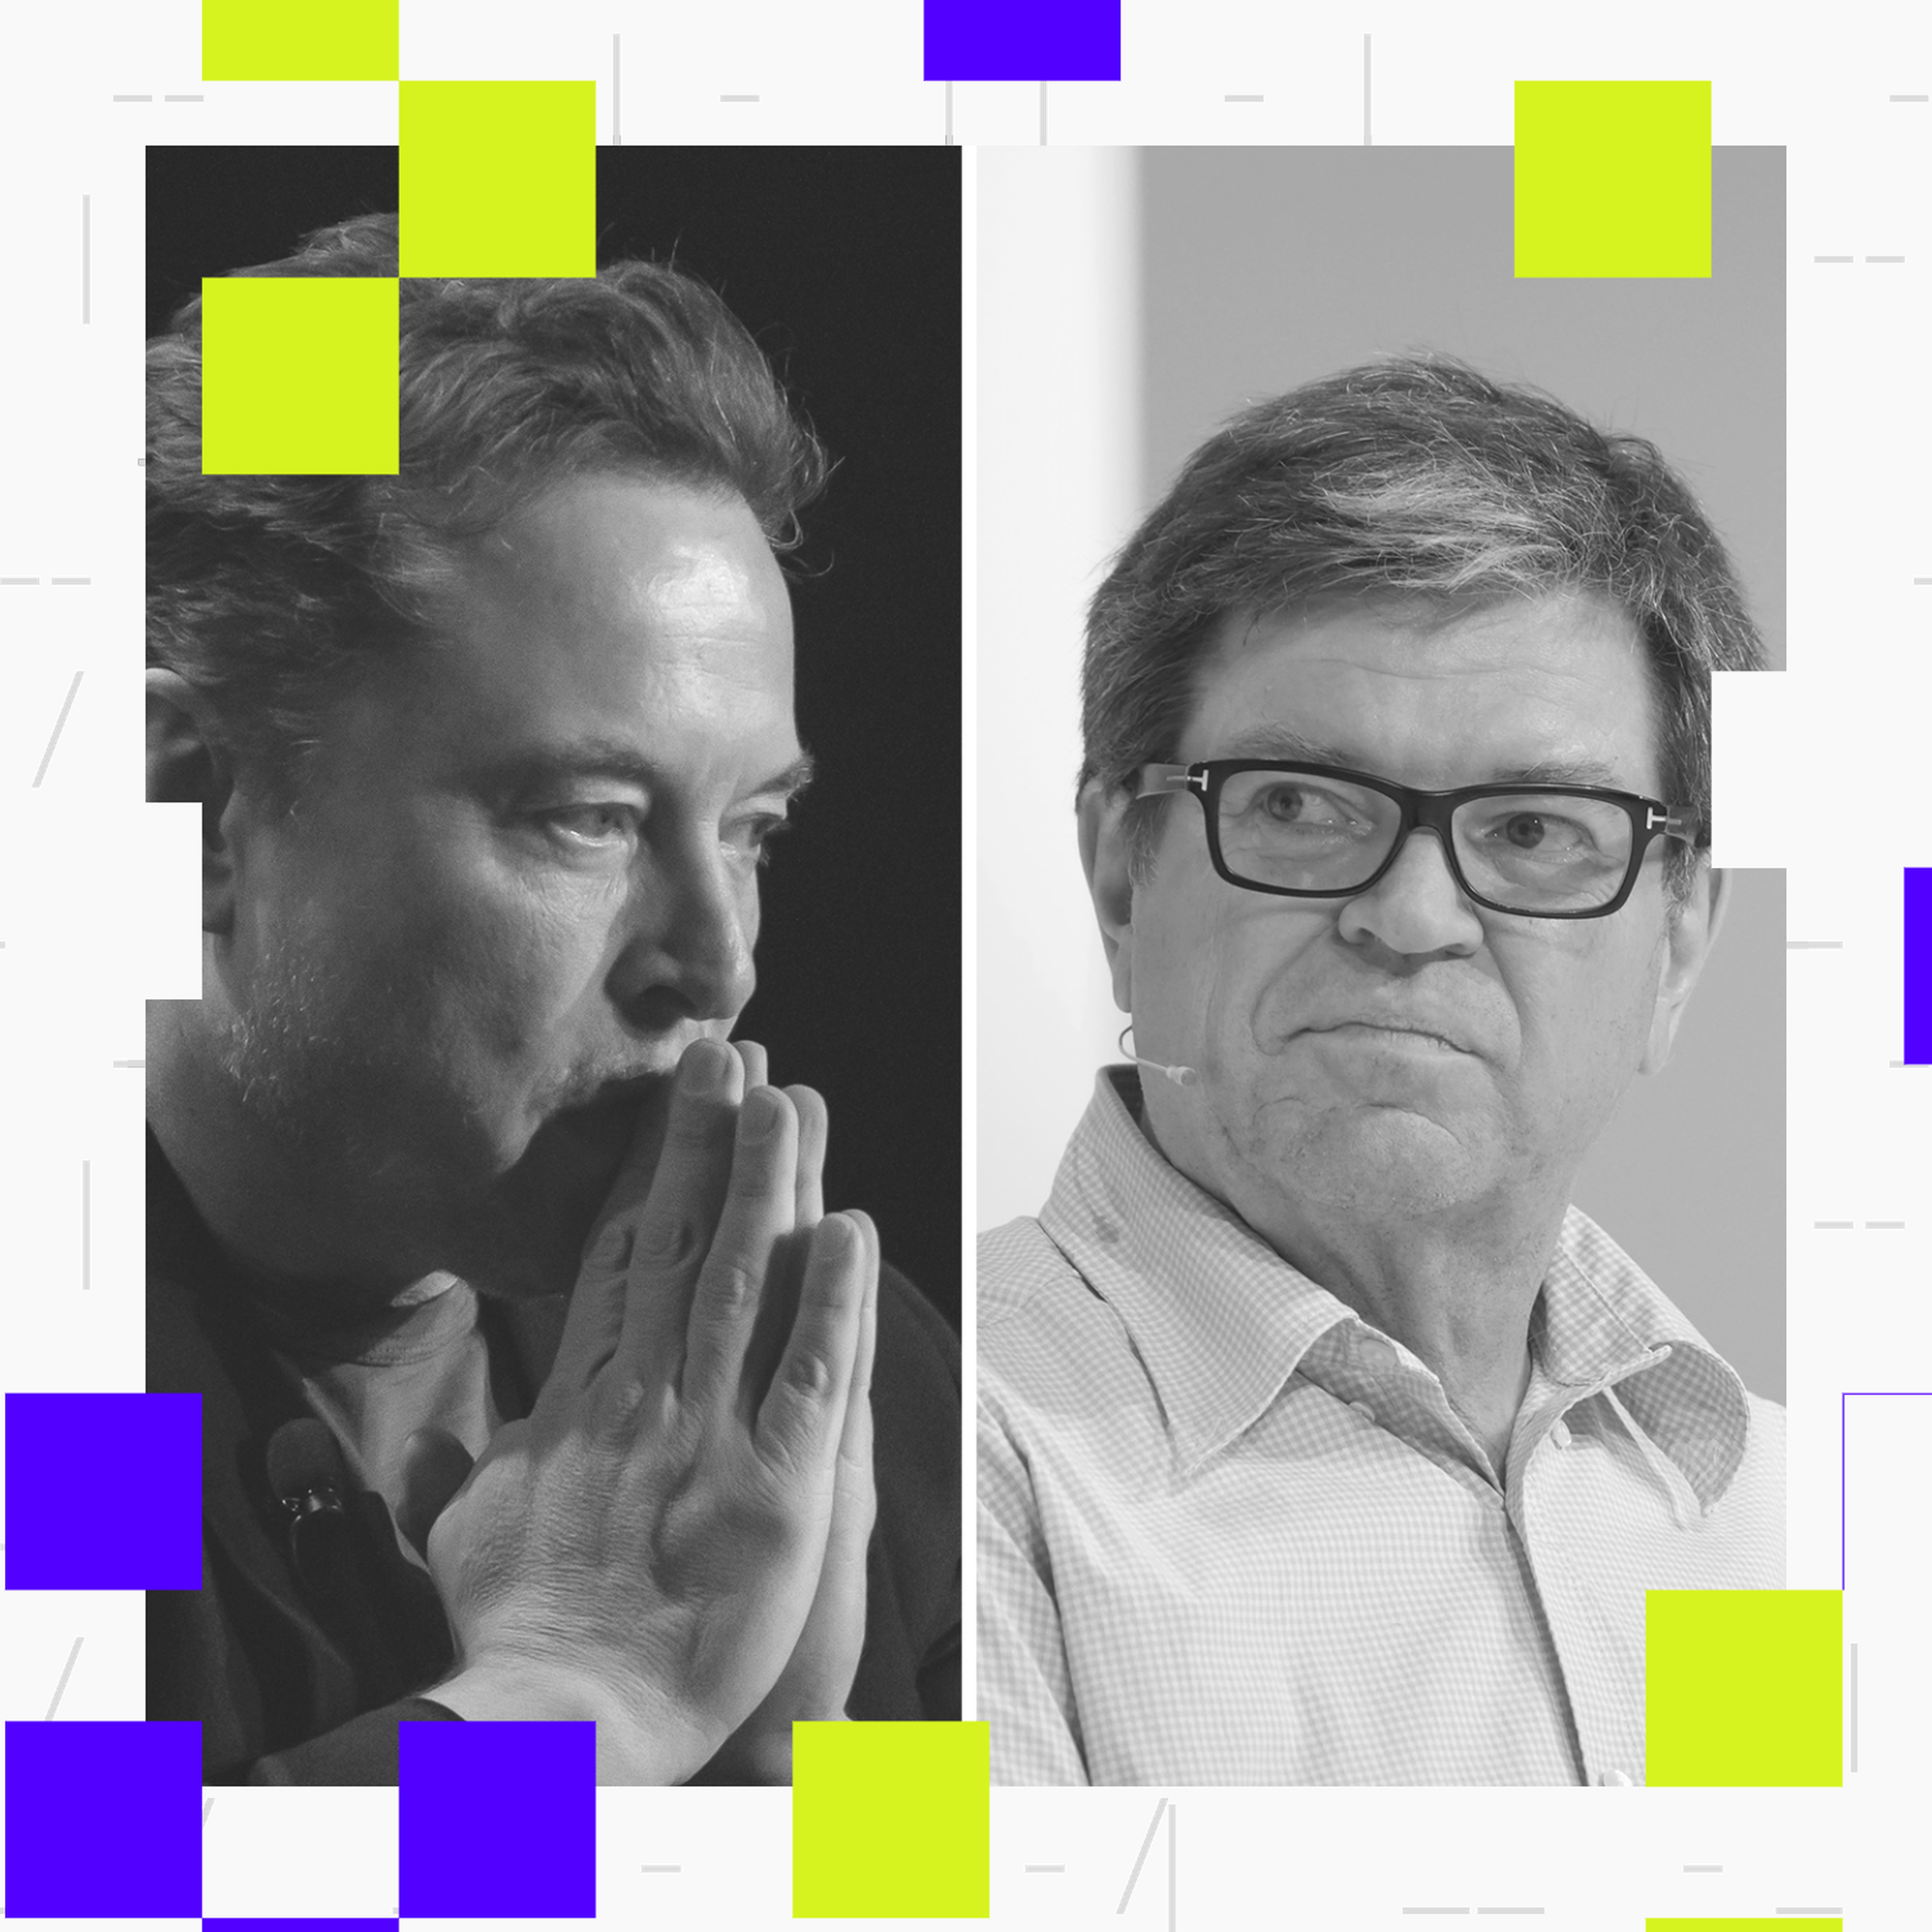 A side by side photo of Elon Musk and Yann LeCun.